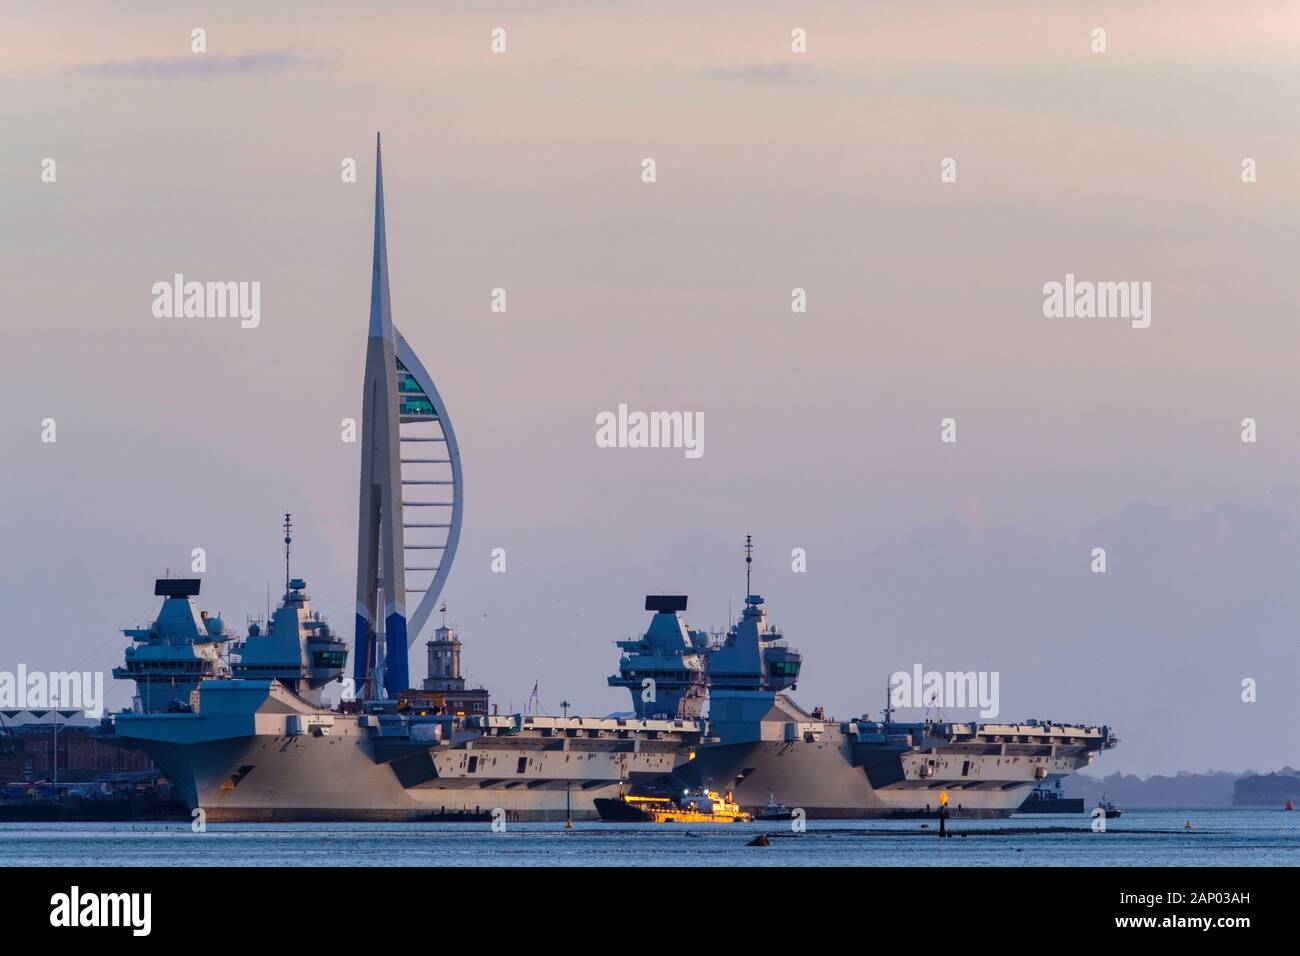 HMS Prince of Wales & HMS Queen Elizabeth docked in Portsmouth dockyard with the spinnaker tower in view. Stock Photo